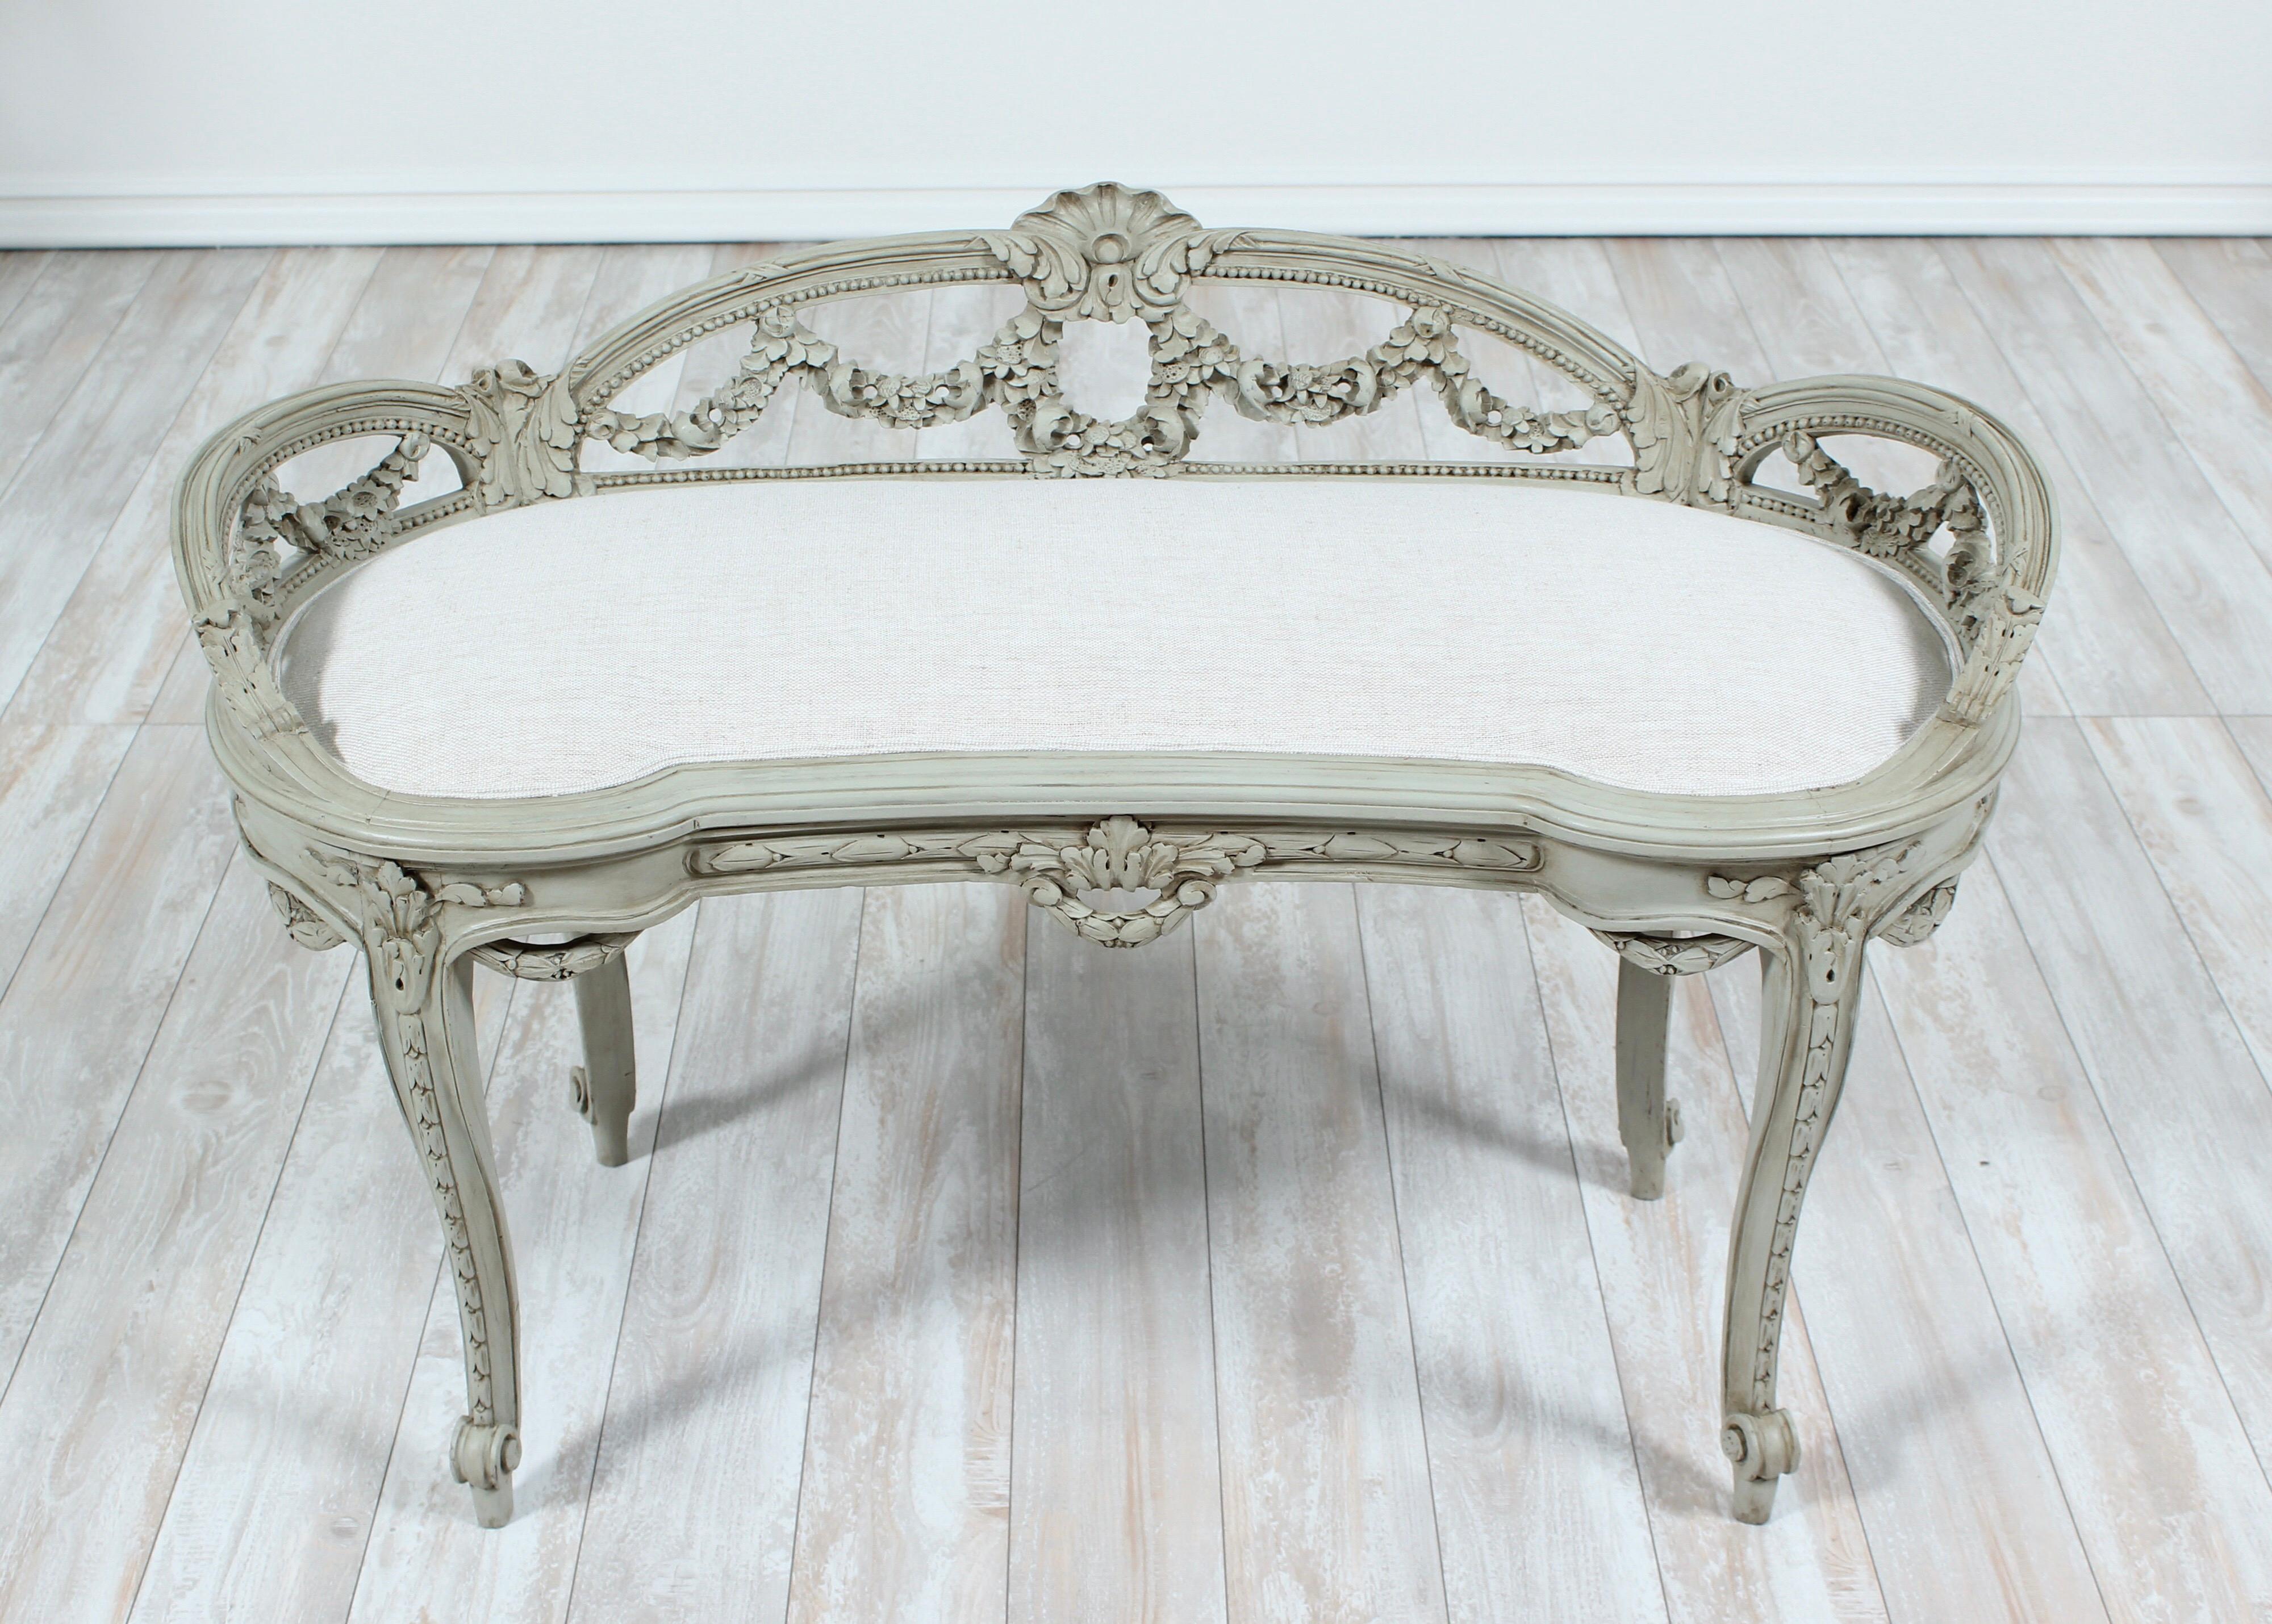 Beautiful French, 1920s Louis XV-style painted and carved wood bench with newly upholstered Belgian linen seat. The bench features delicately carved floral garlands, bead trim and cabriolet legs. Grey painted finish is naturally distressed. Seat